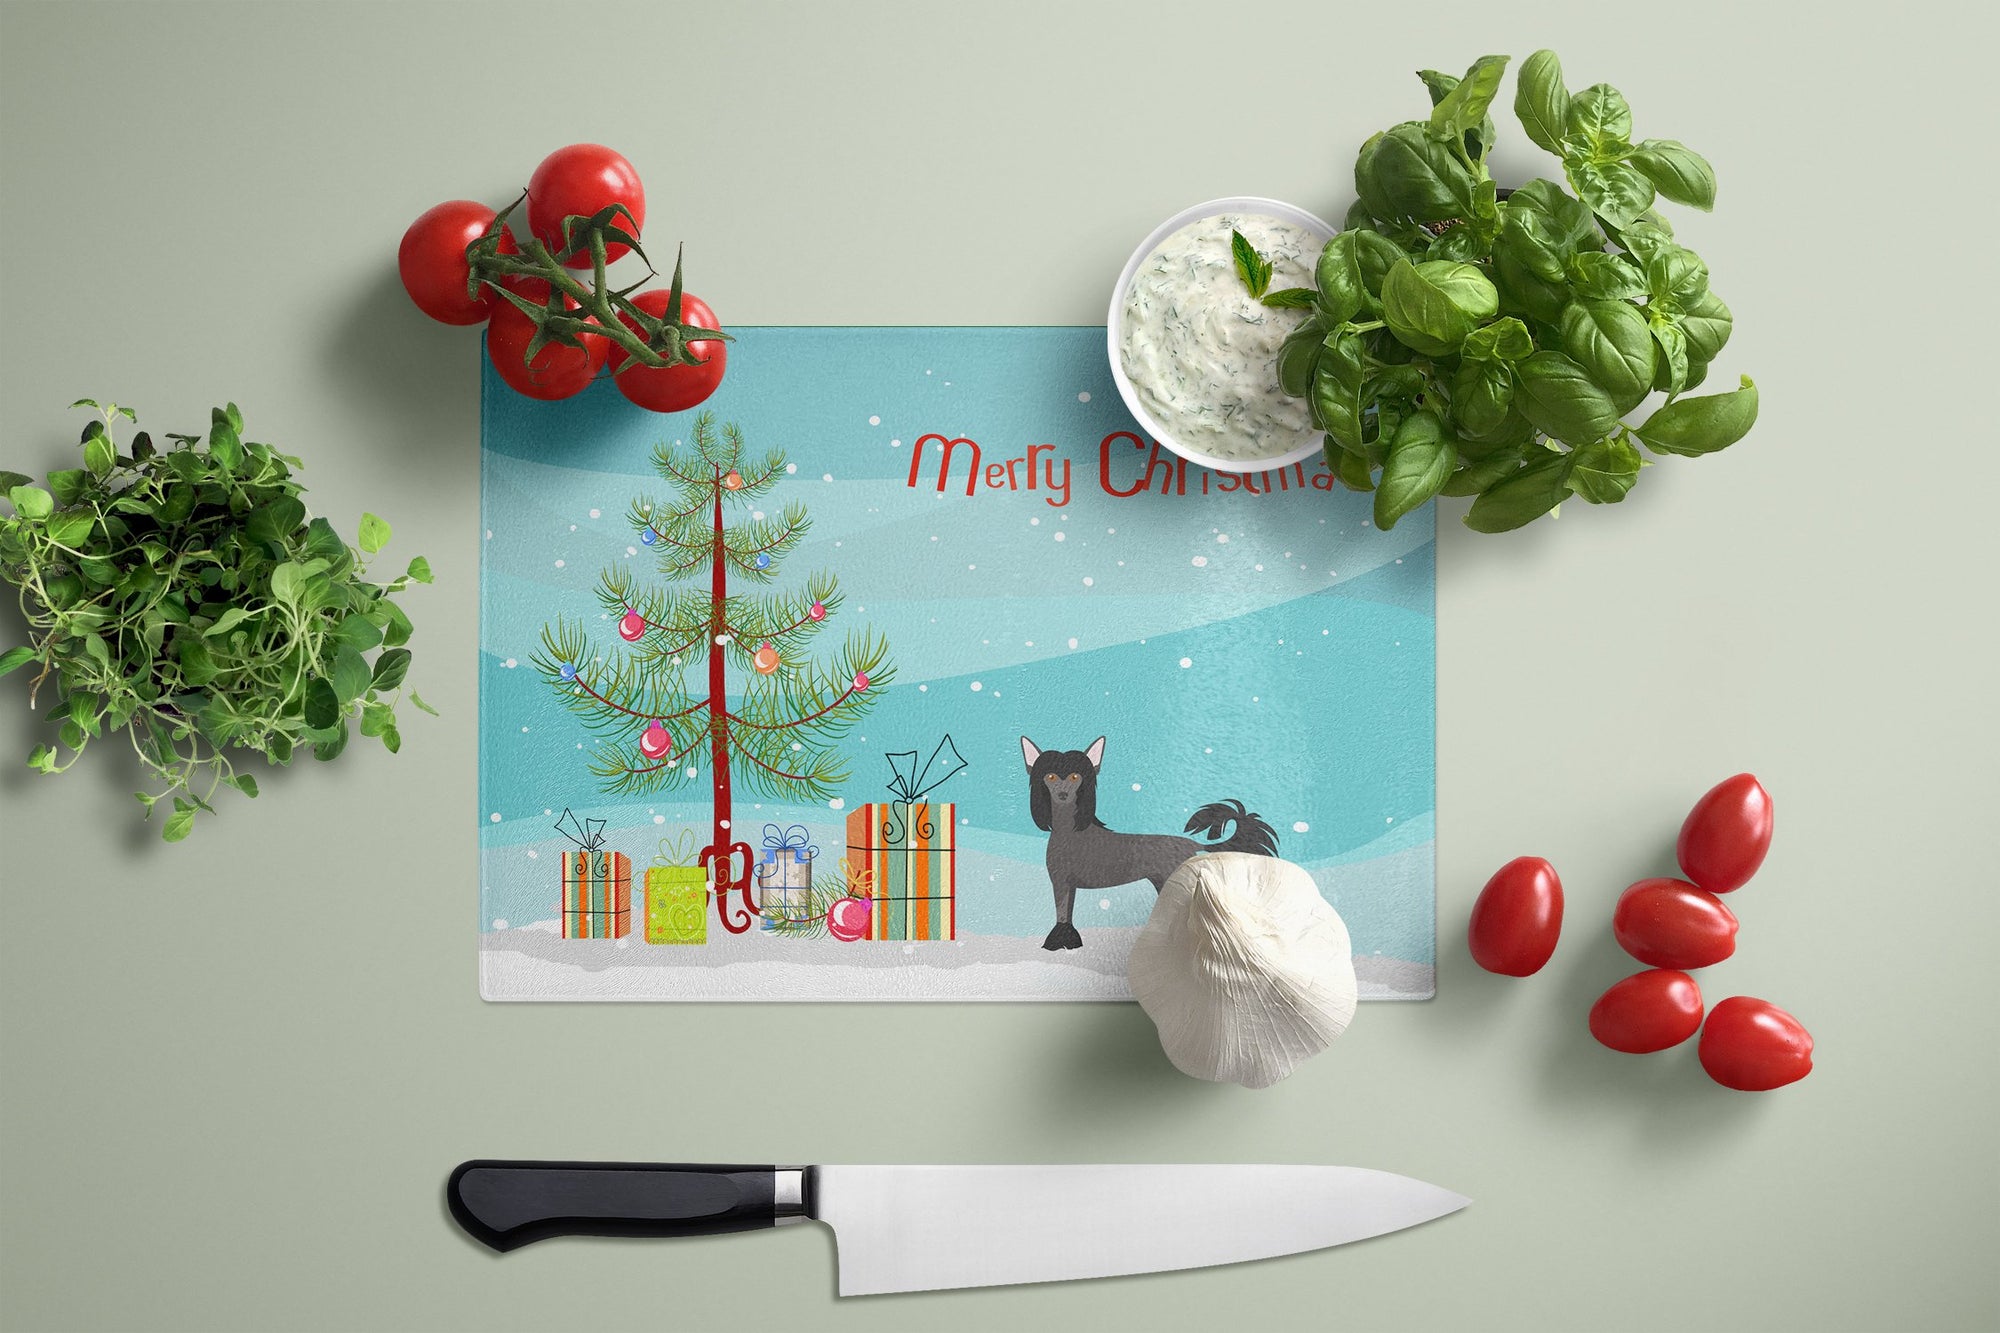 Chinese Crested Christmas Tree Glass Cutting Board Large CK3447LCB by Caroline's Treasures